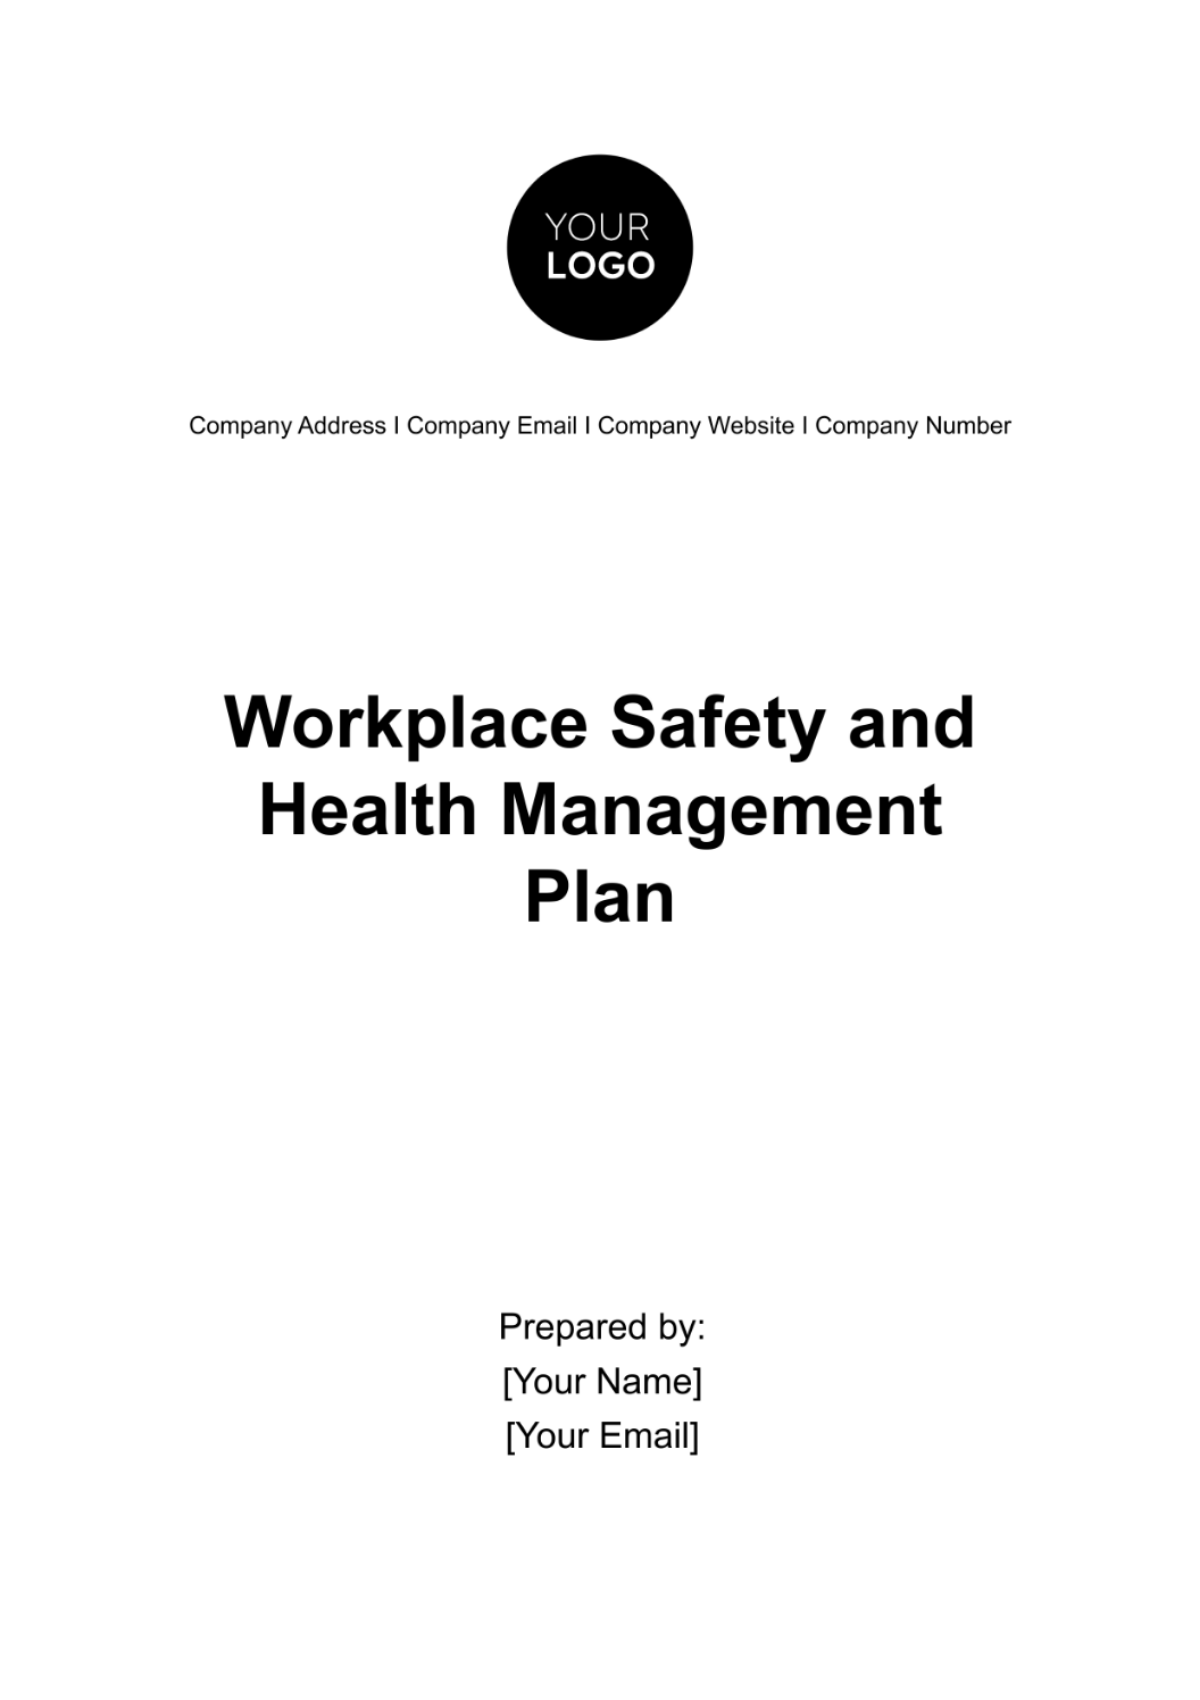 Workplace Safety and Health Management Plan Template